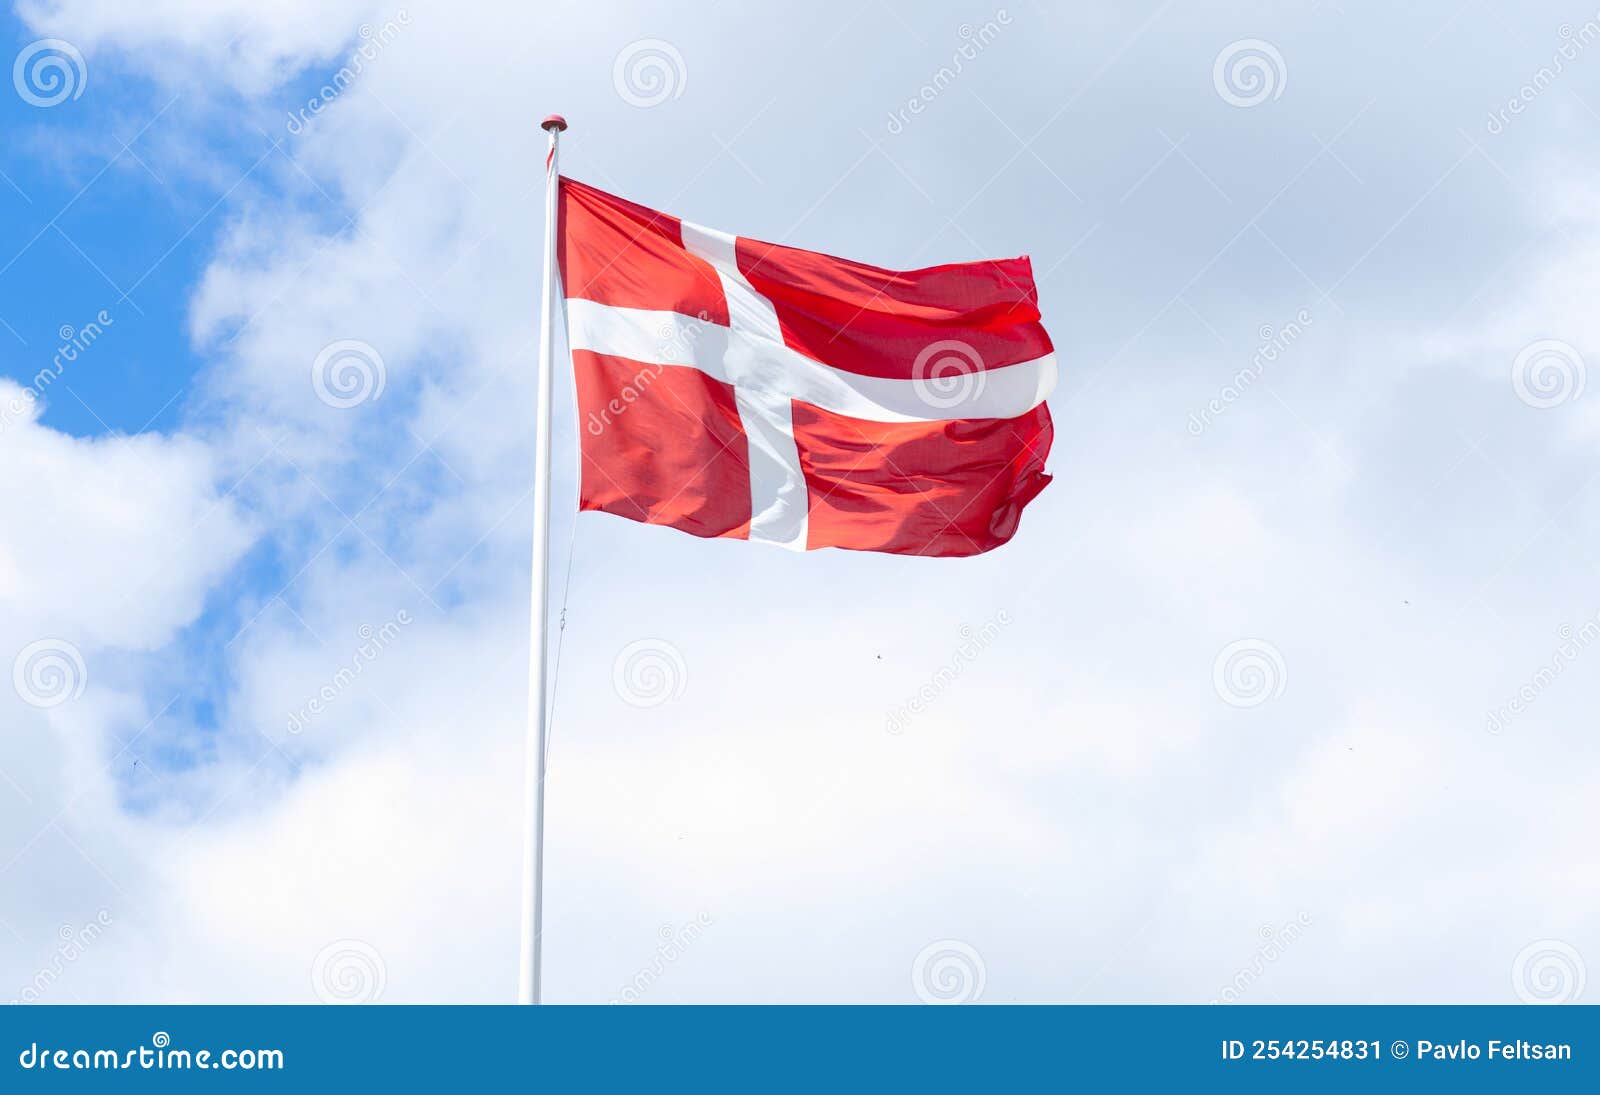 flag of denmark in a blue sky with clouds